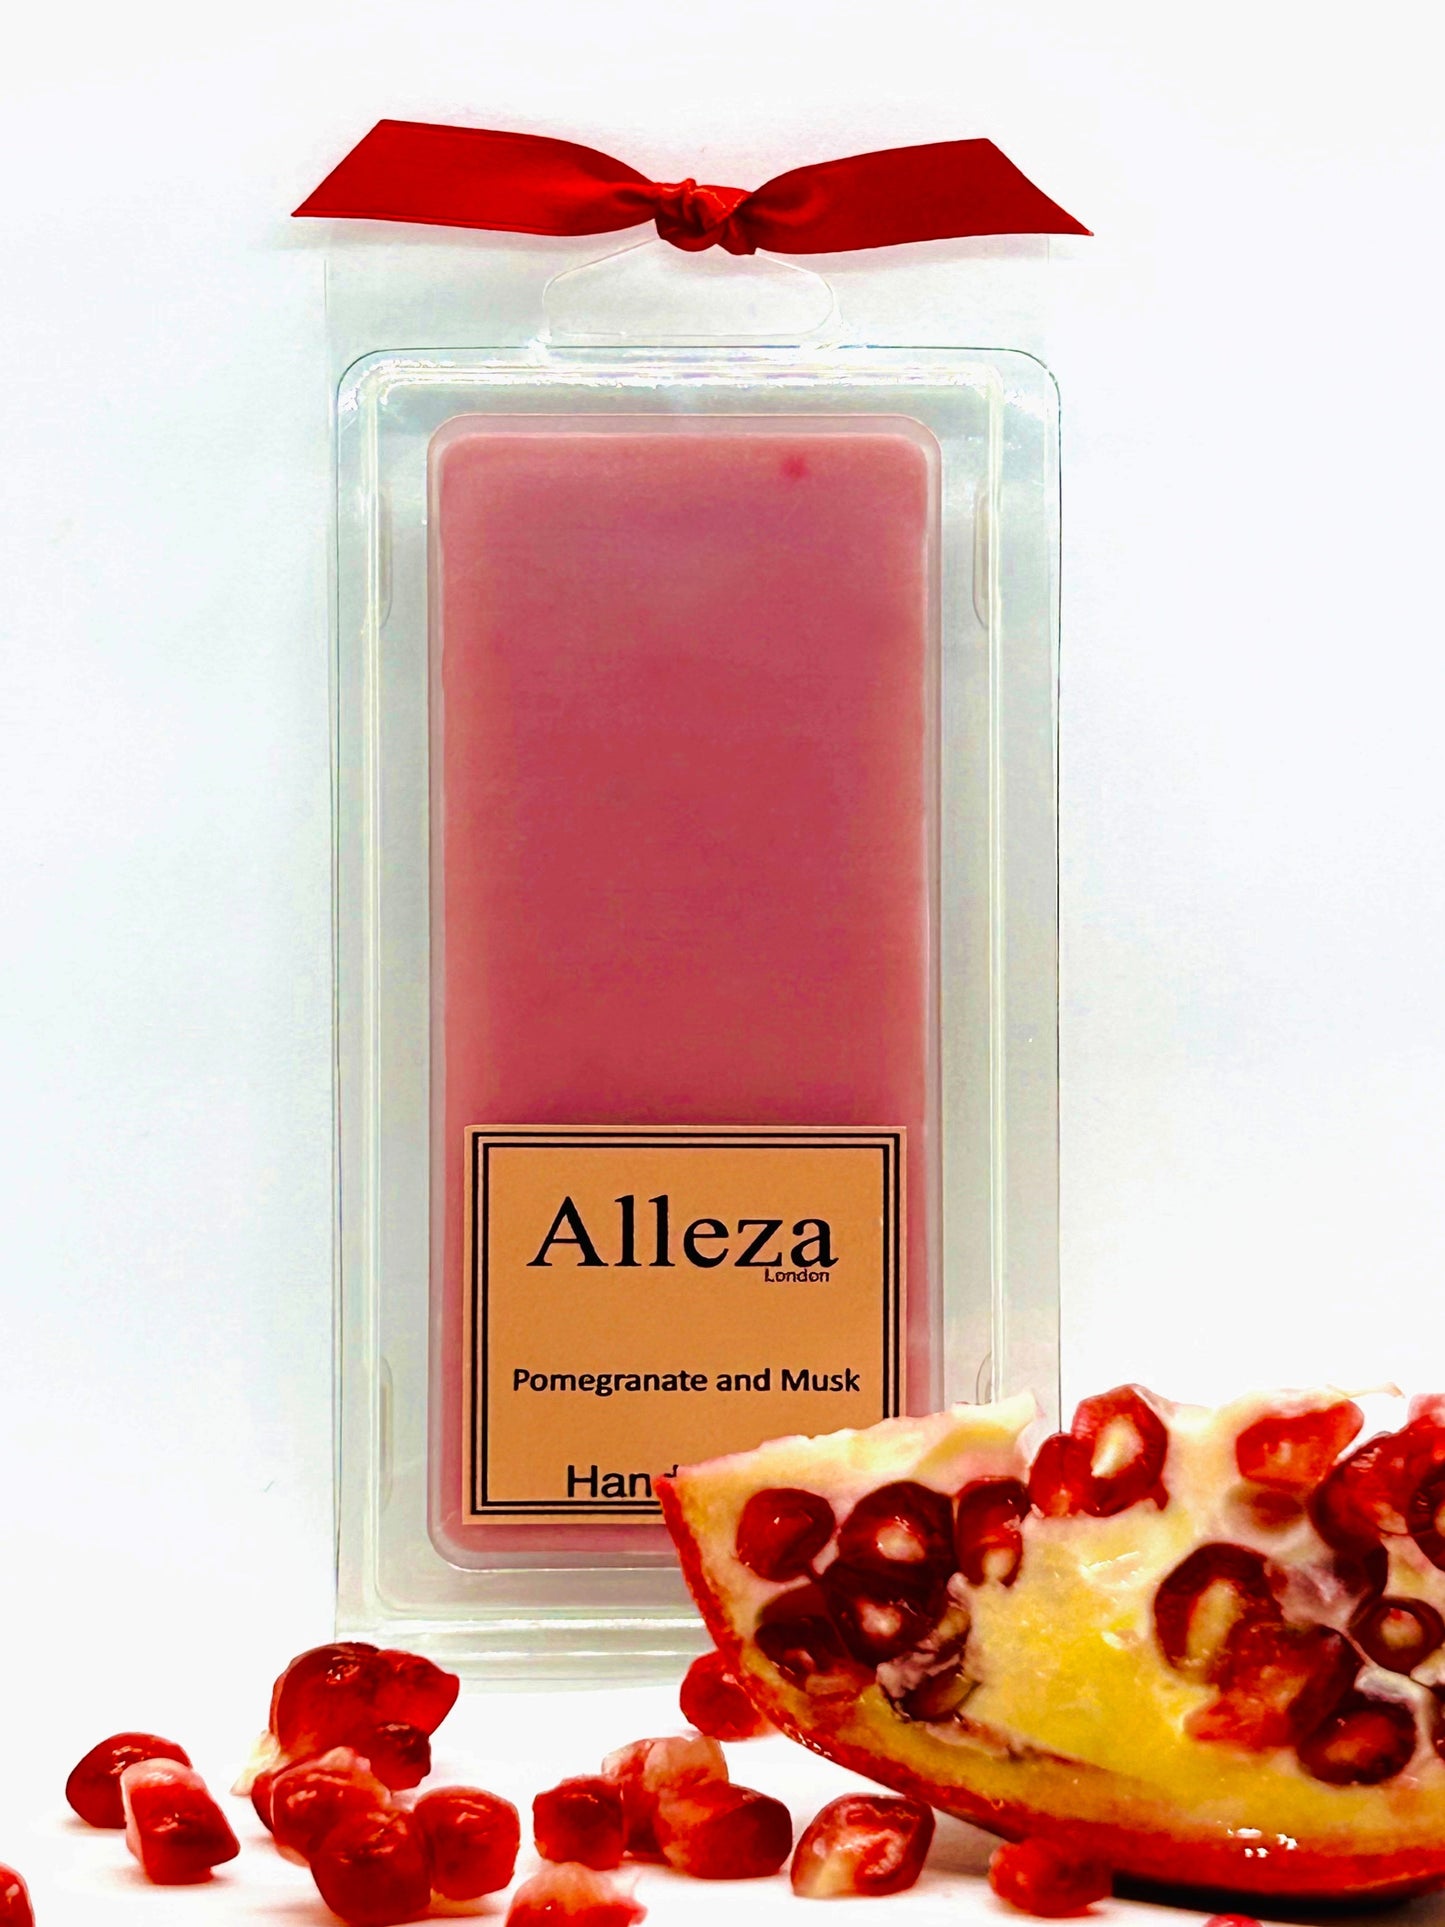 Pomegranate and Musk